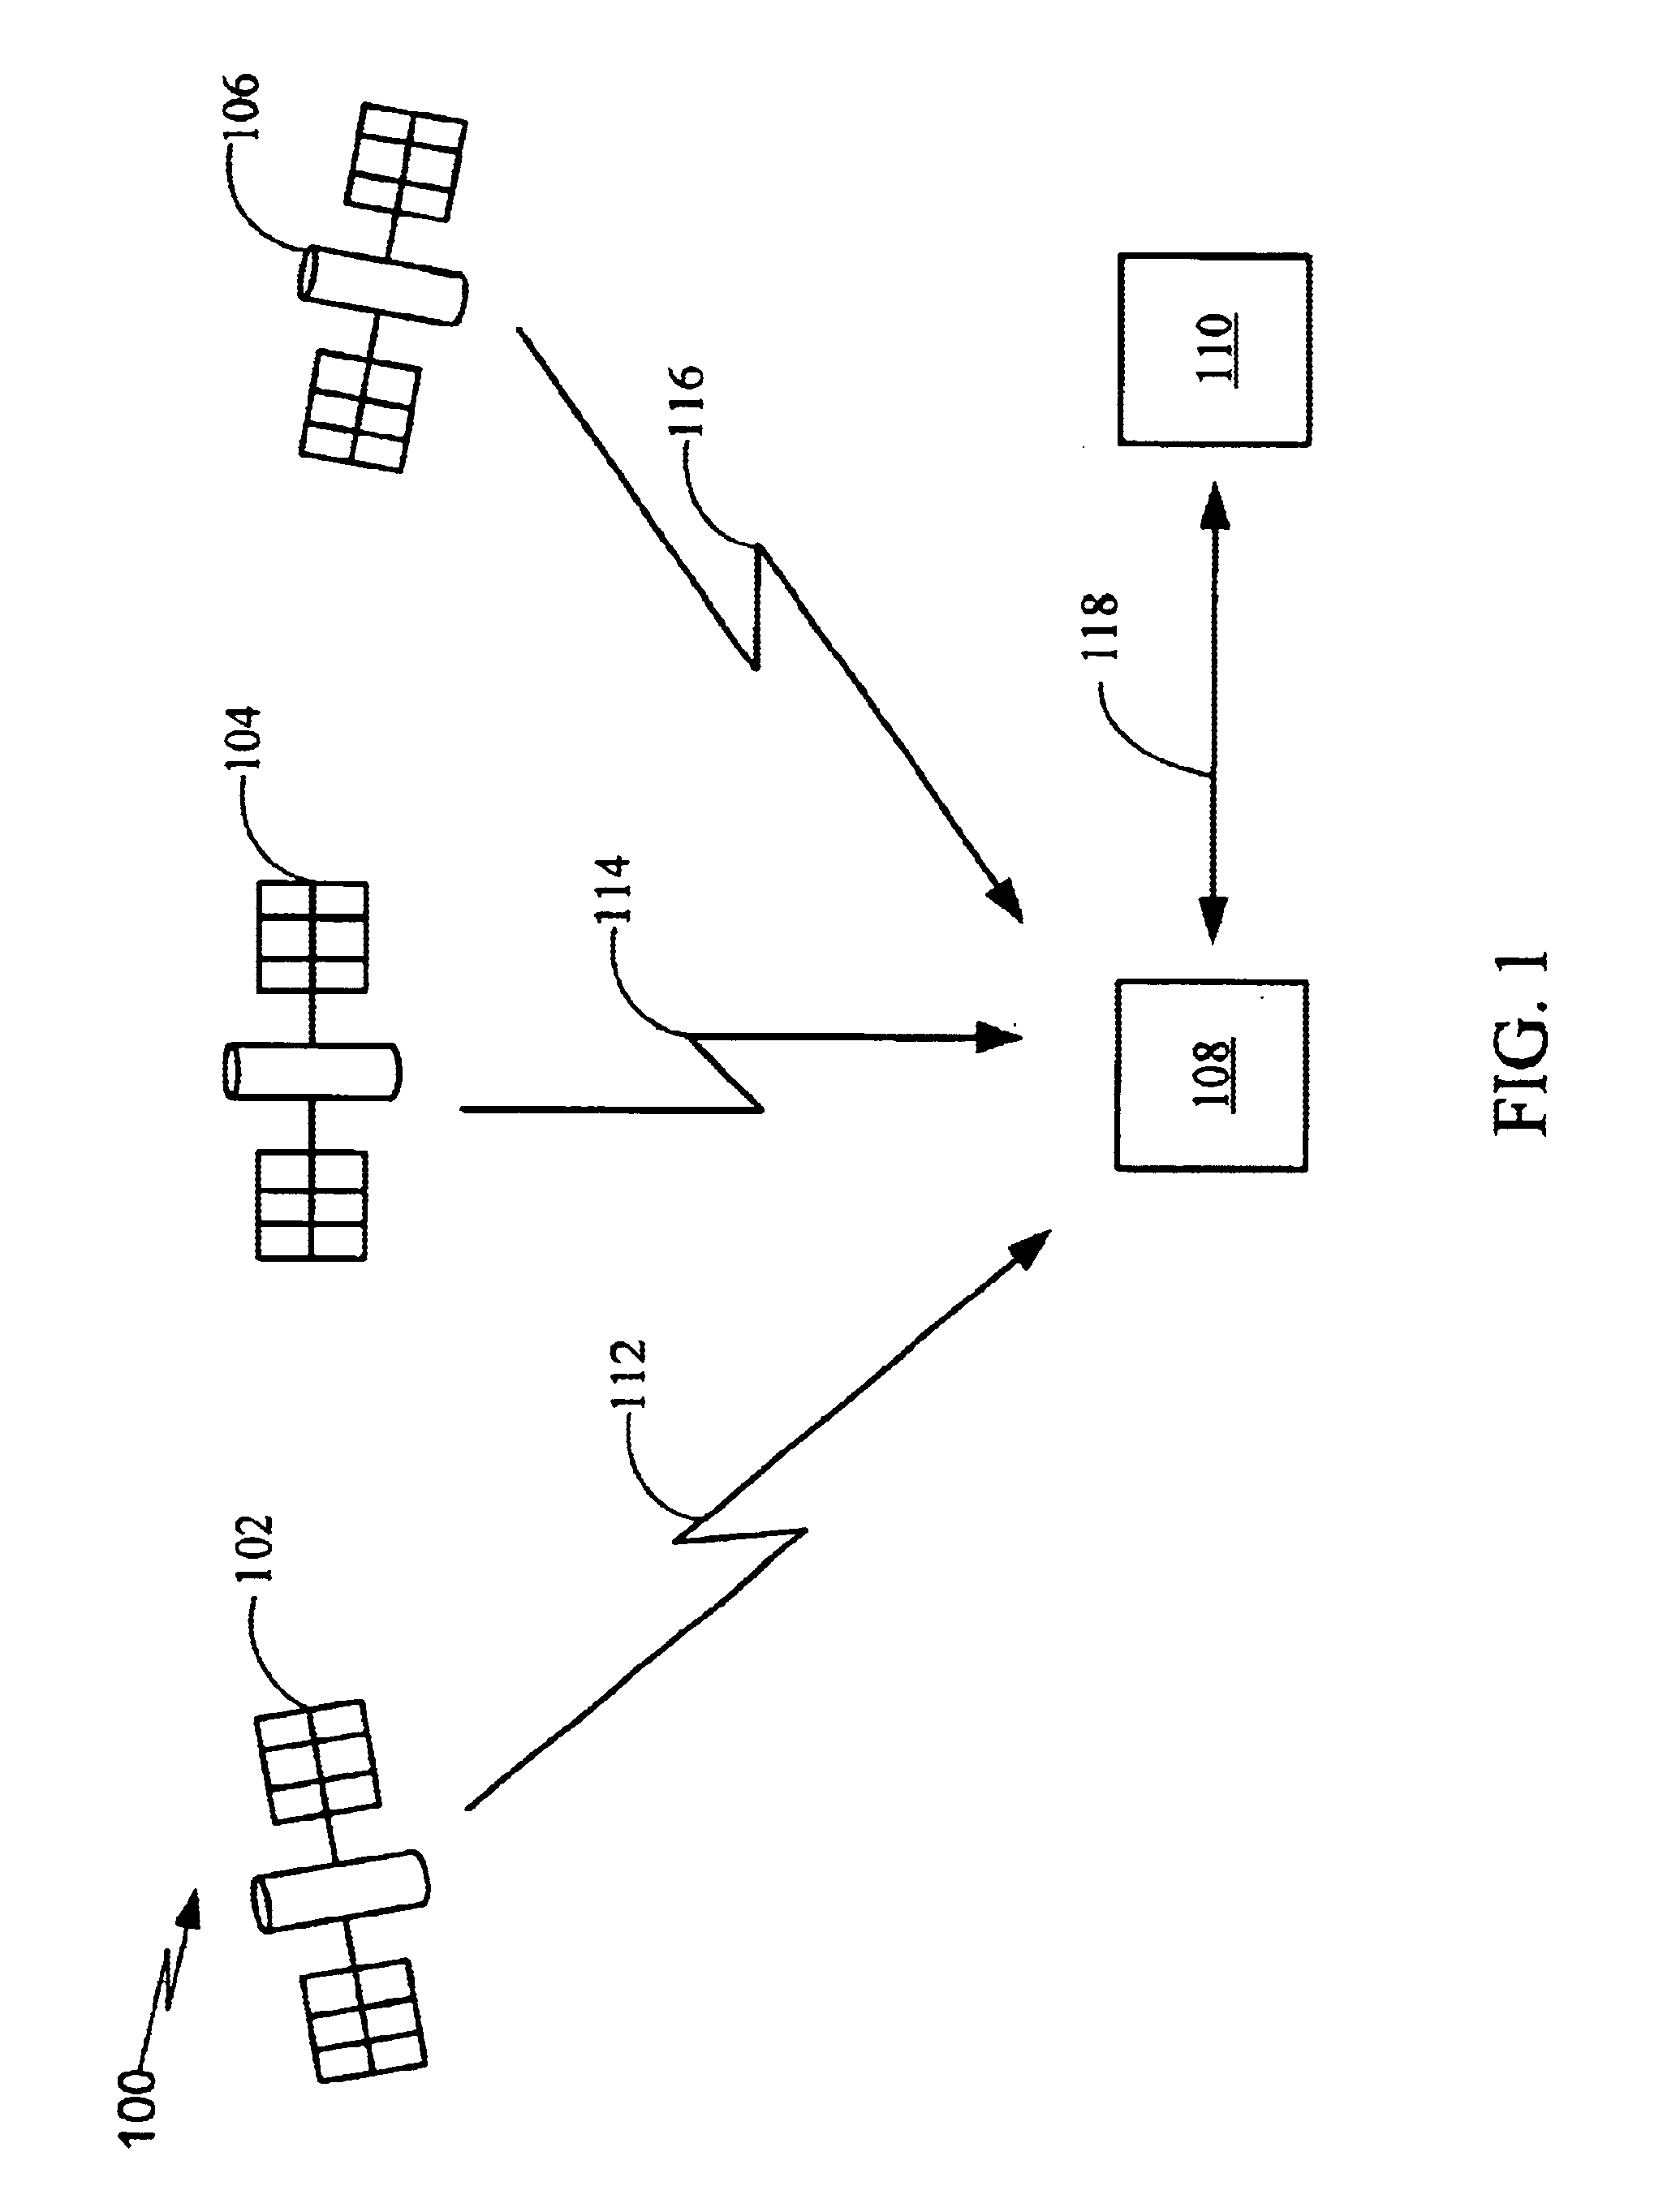 Generic satellite positioning system receivers with selective inputs and outputs